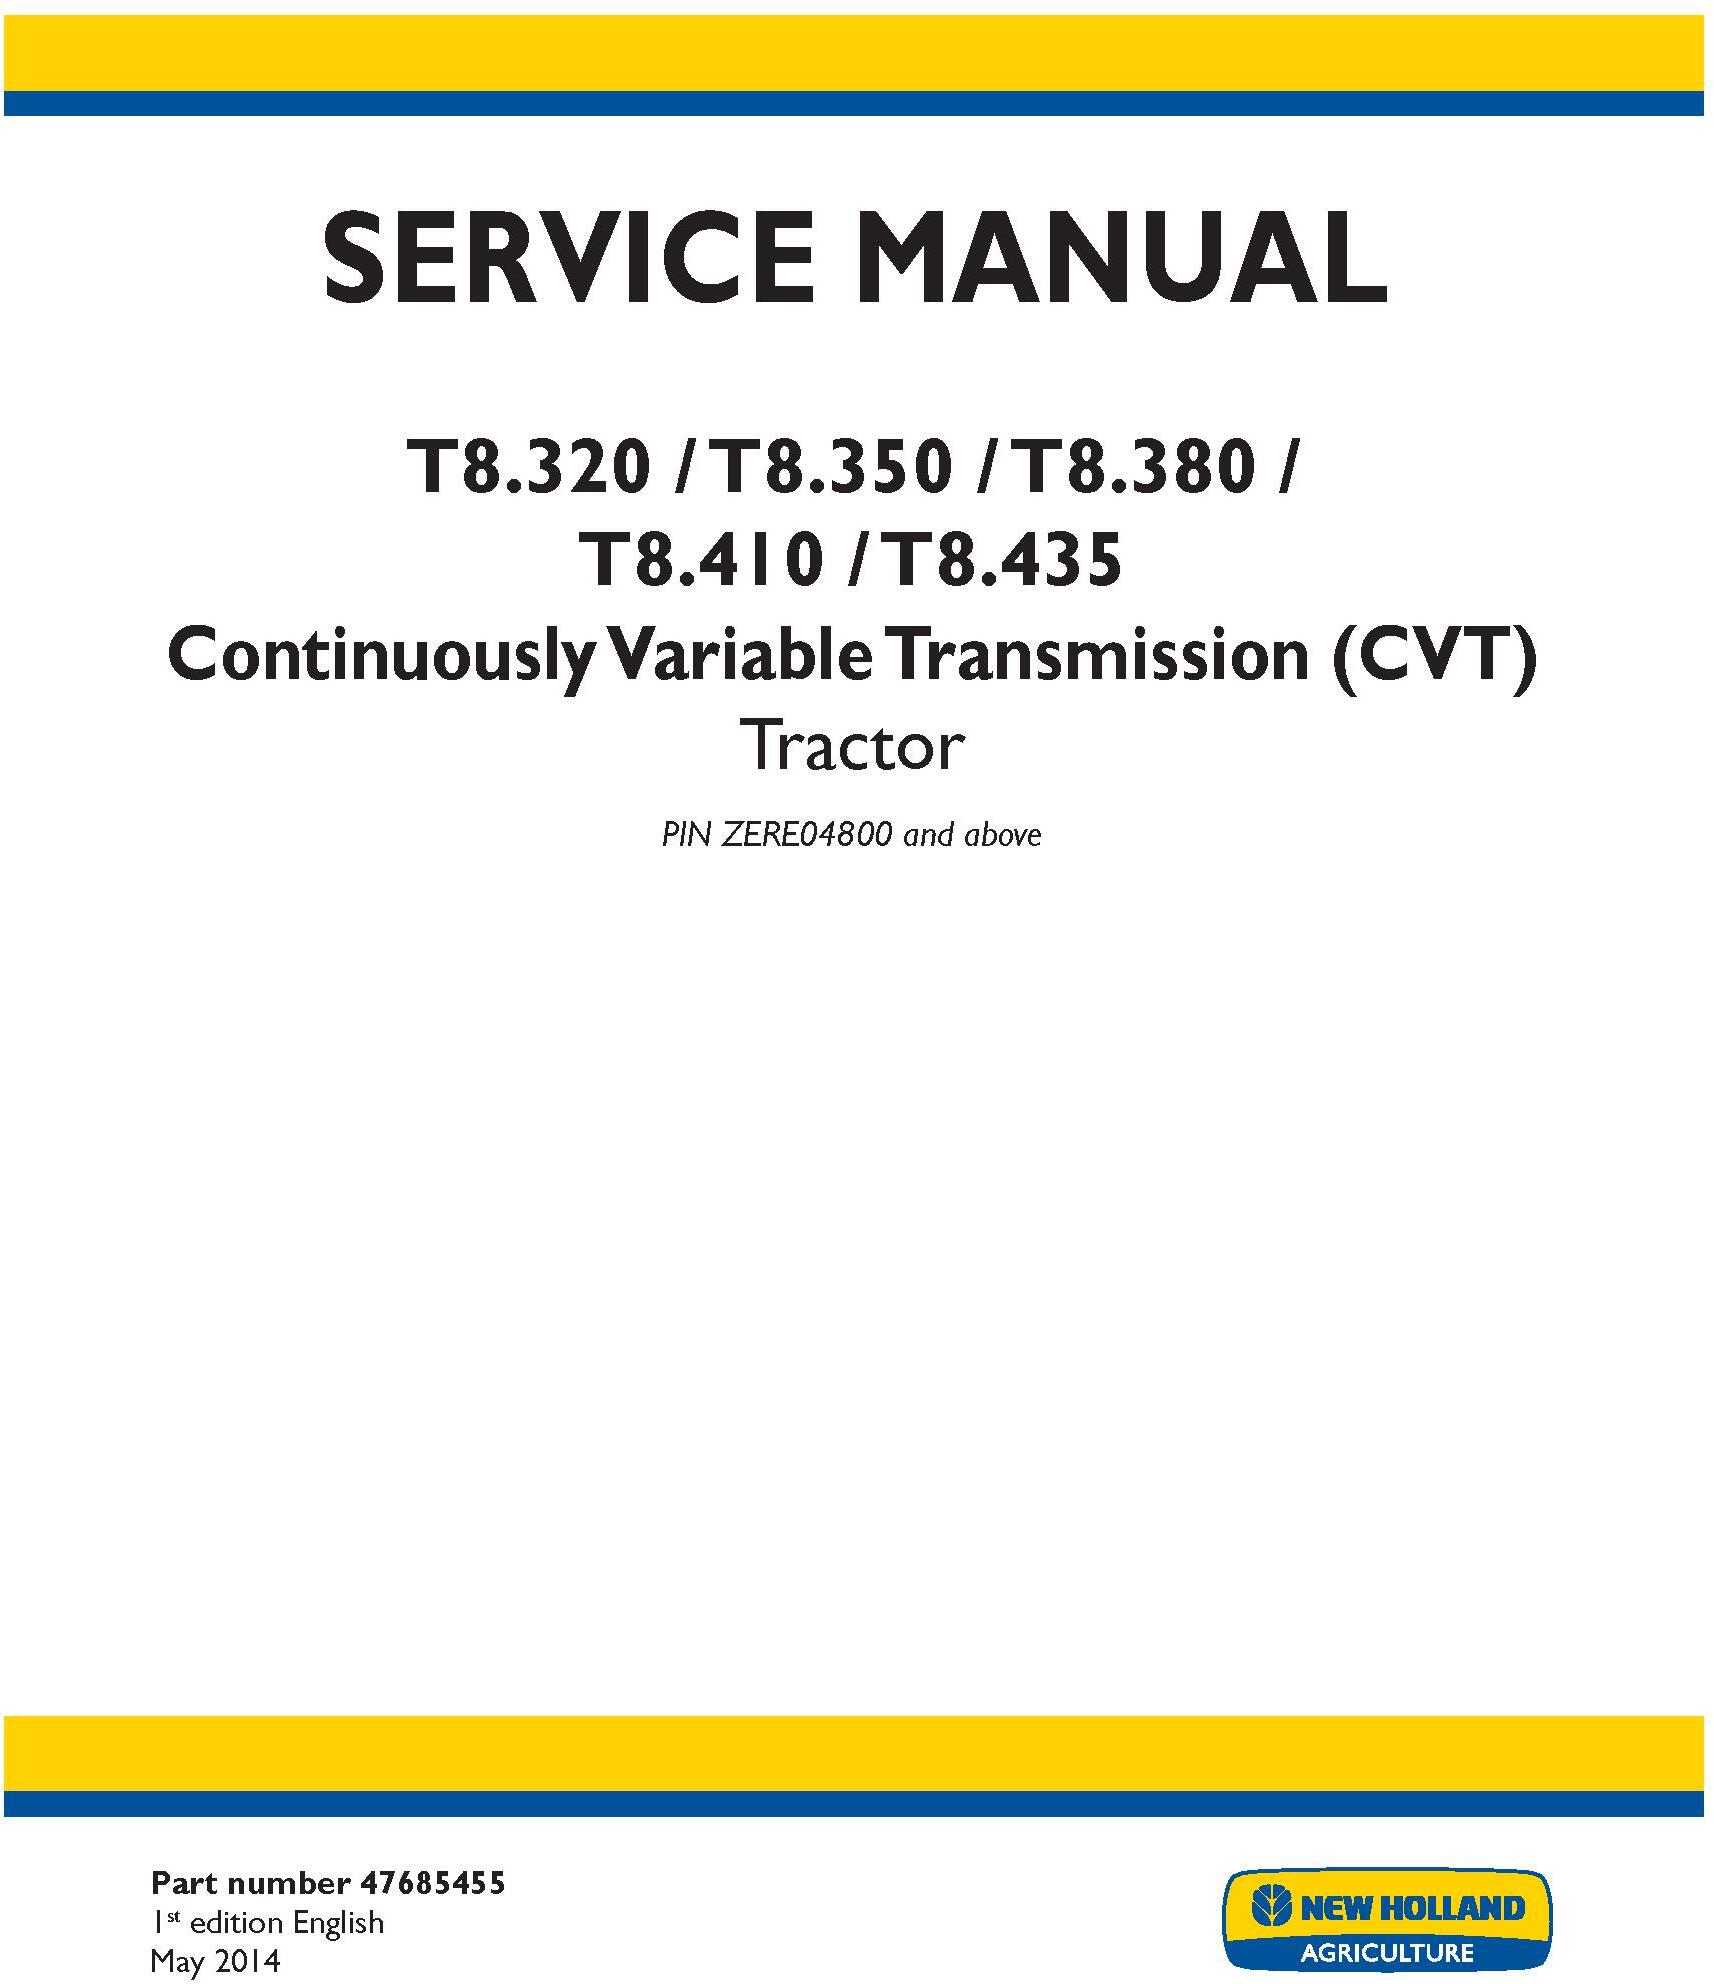 New Holland T8.320, T8.350, T8.380, T8.410, T8.435 Tractor w.CVT Transmission Service Manual (USA)